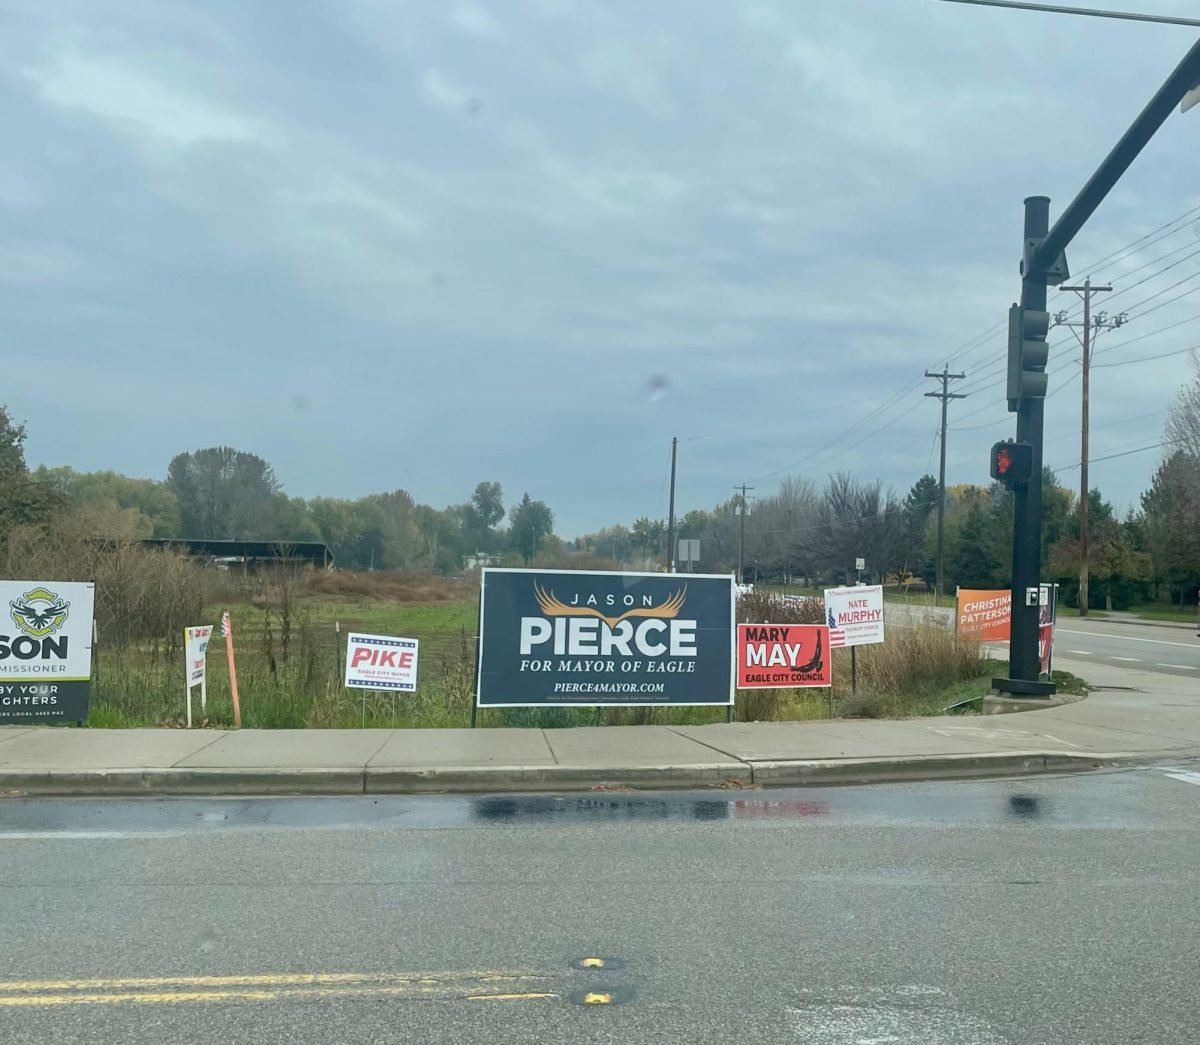 Political+signs+are+placed+throughout+the+city+of+Eagle.+These+signs+promote+runners+for+the+upcoming+election.+Residents+of+Eagle+will+vote+for+a+mayor+on+Nov.+7.+